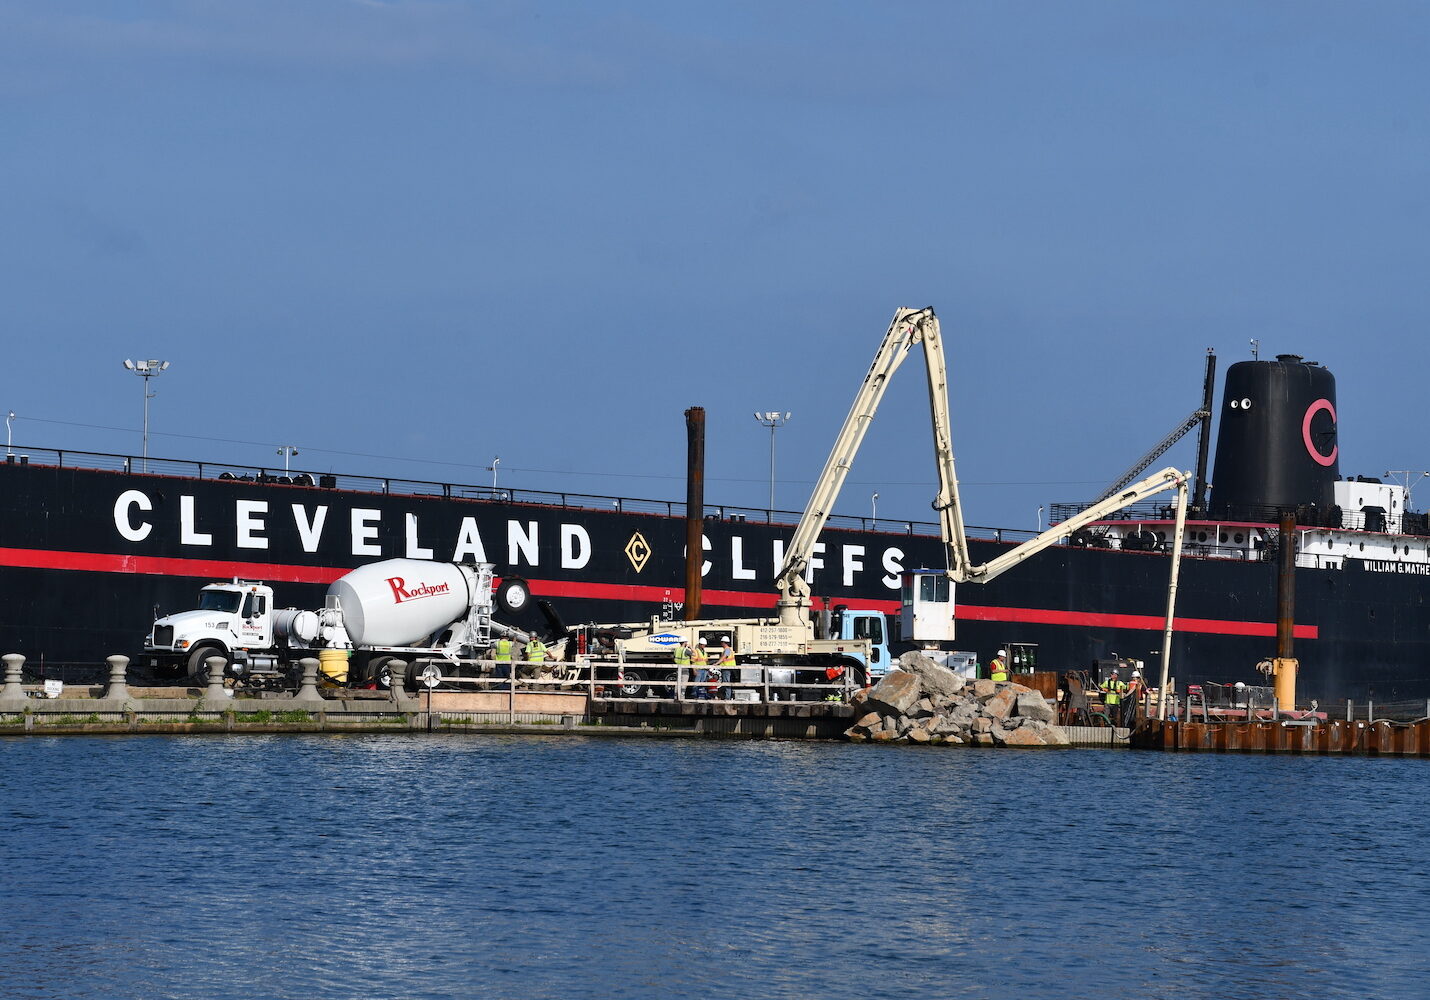 Concrete truck sit in front of black ship with red stripe that reads "Cleveland Cliffs" on the water.